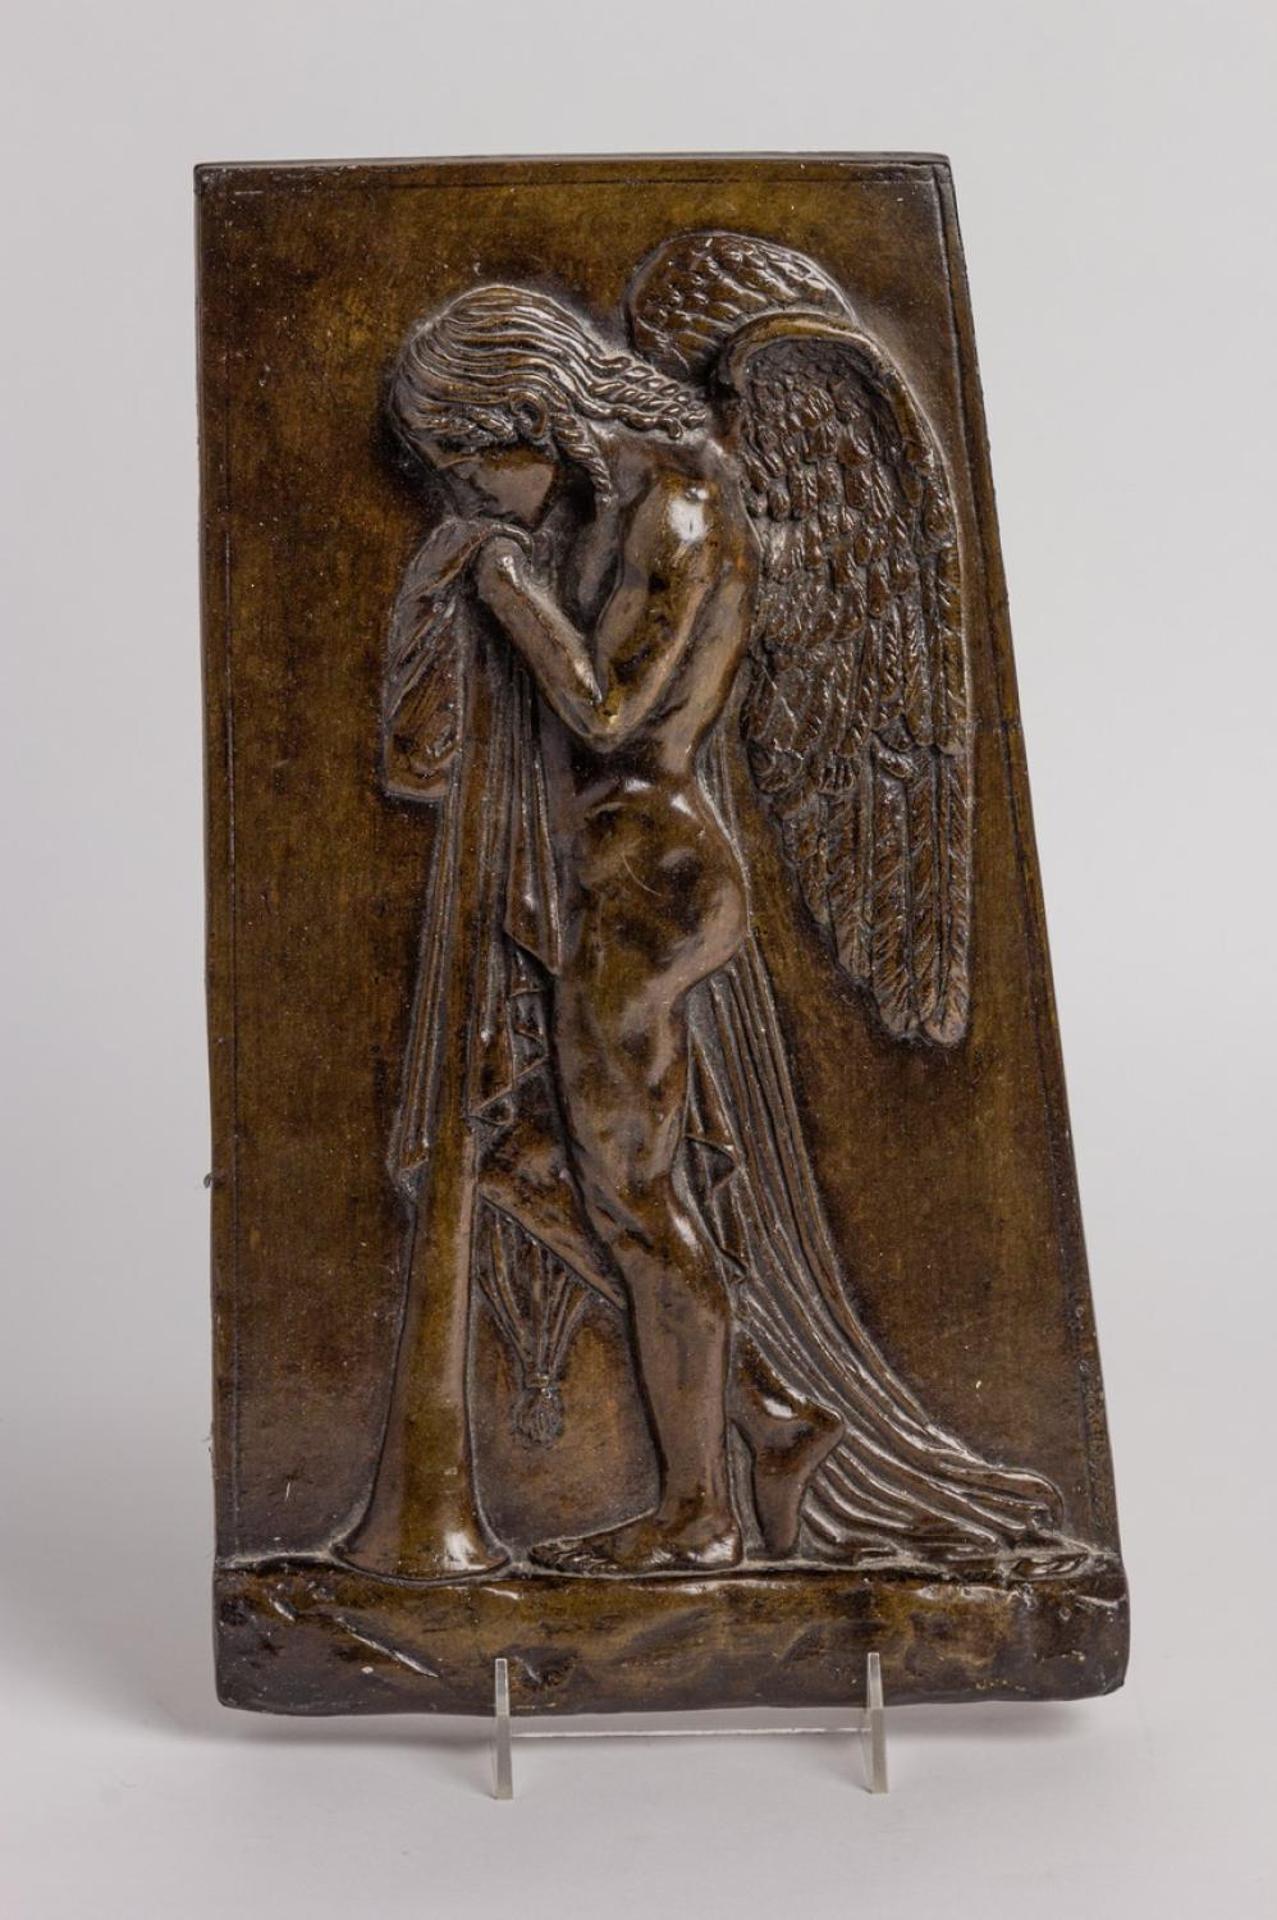 Louise Solecki Weir - a ceramic plaque depicting an angel bowed over a trumpet